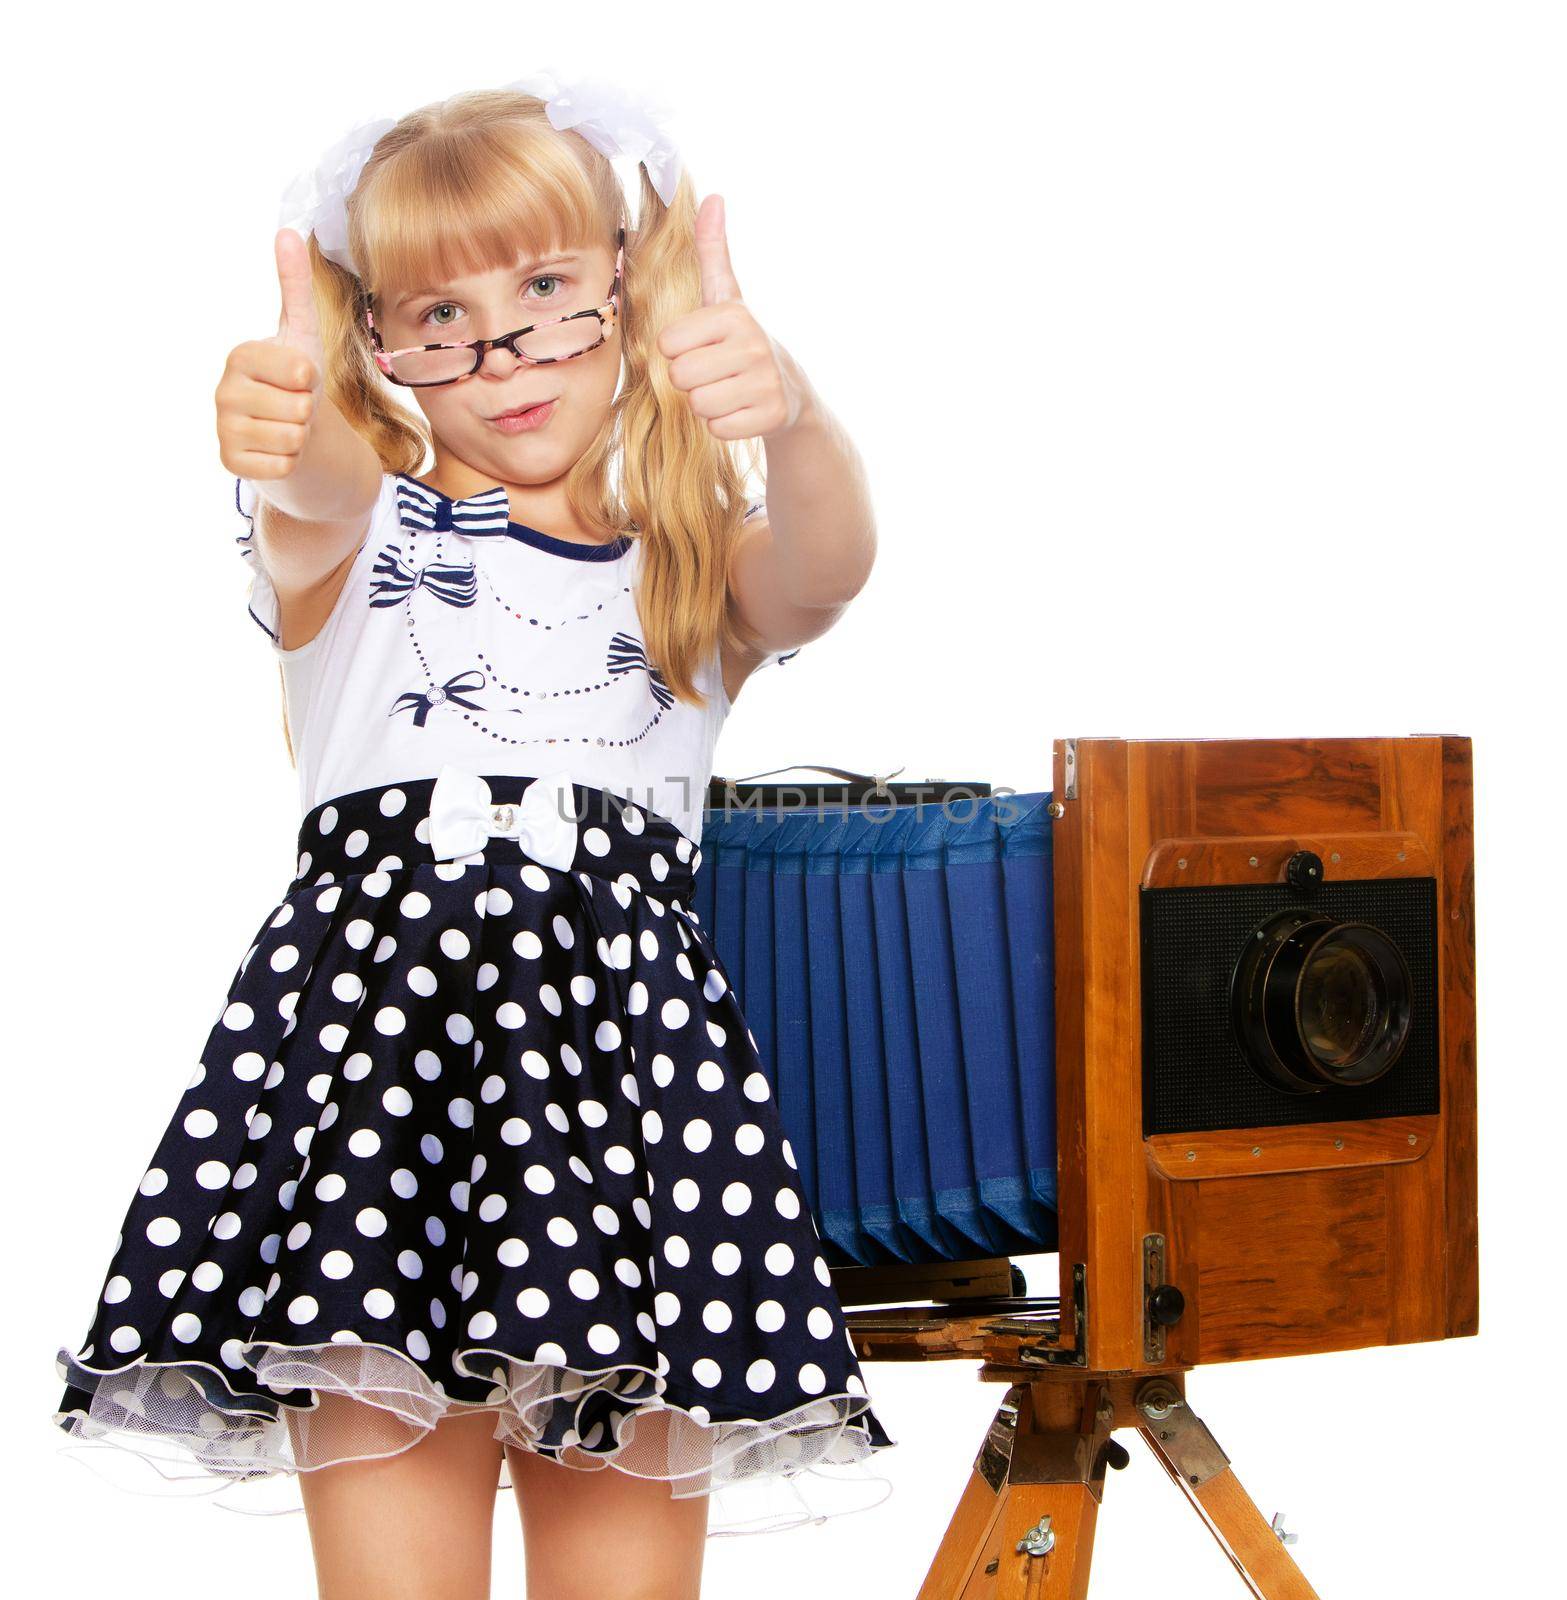 Adorable little blond girl wearing glasses and fancy dress polka dot advertises the old wooden camera-Isolated on white background